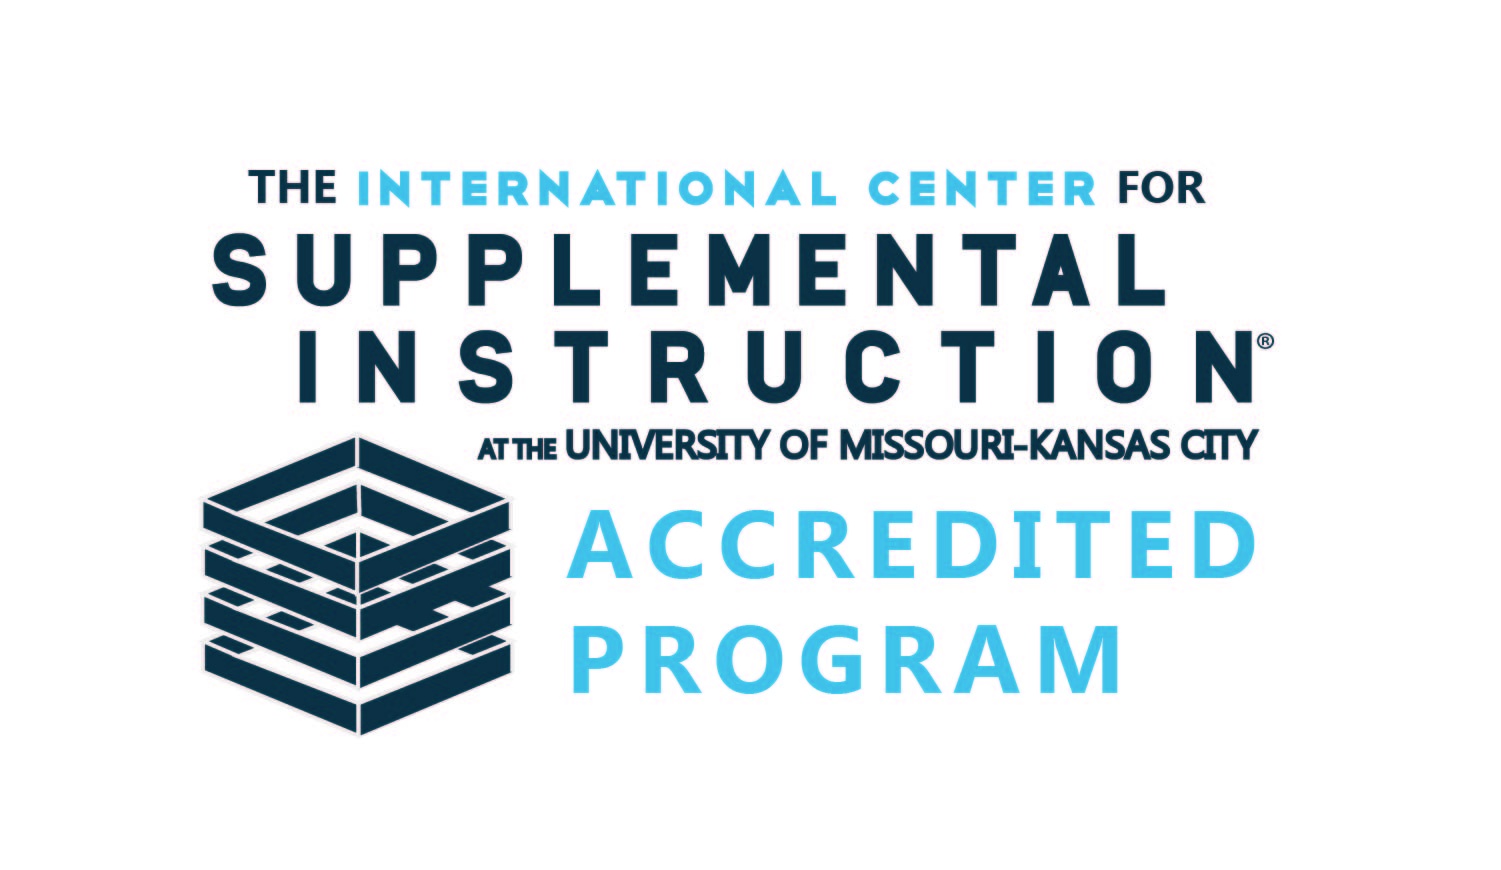 Certified Program by The International Center for Supplement